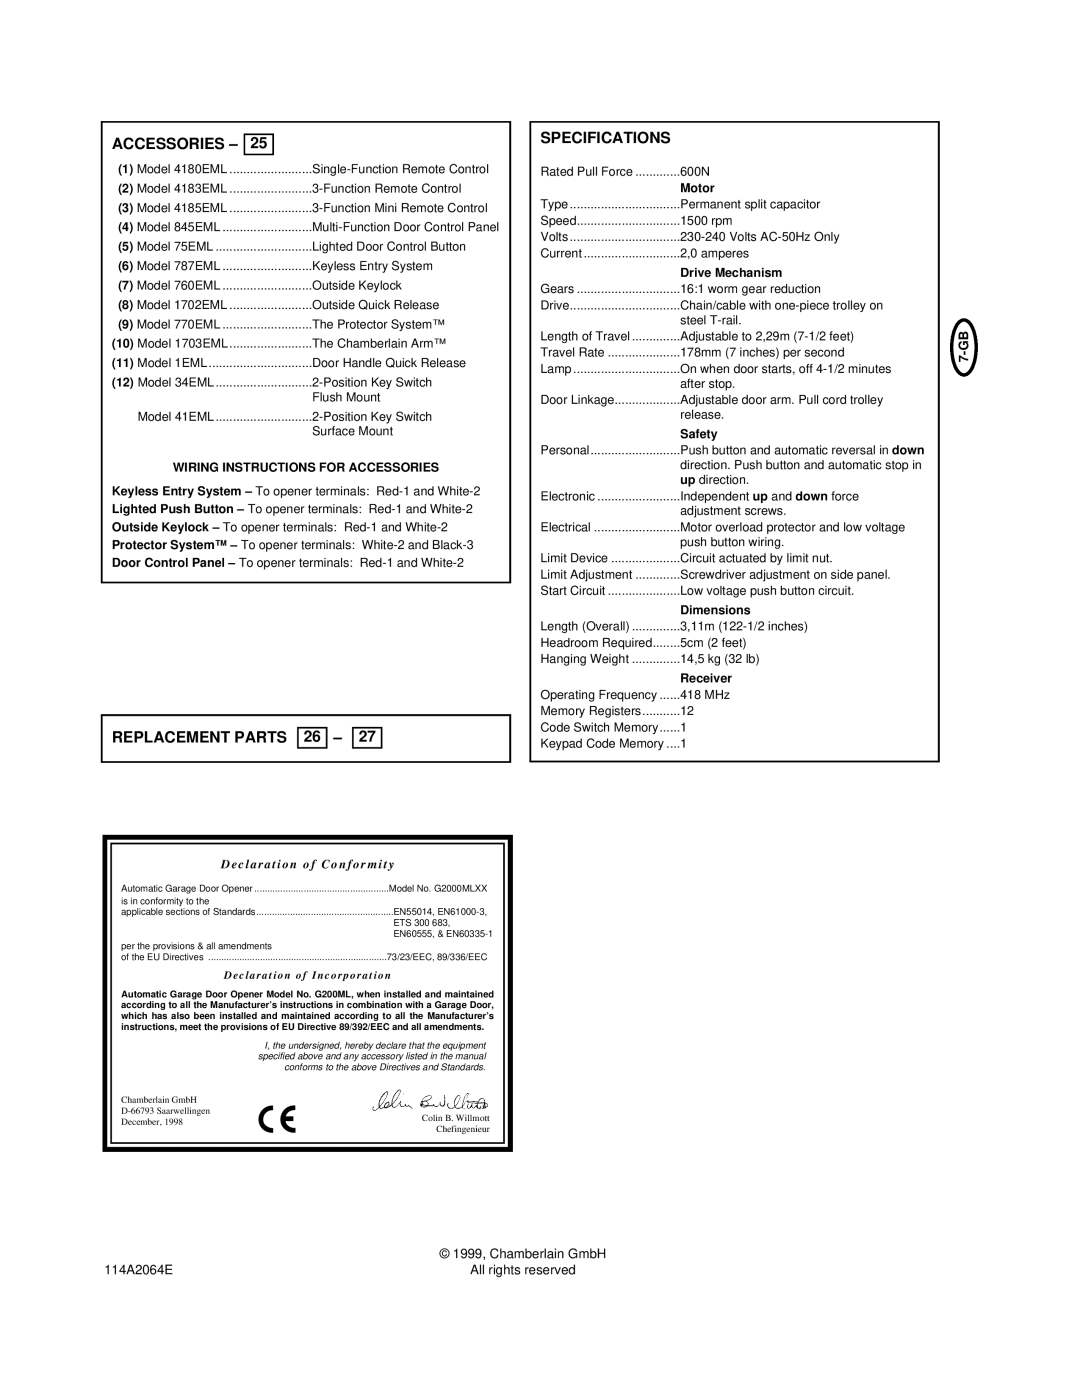 Chamberlain 2000UK manual Accessories, REPLACEMENT PARTS 26, Specifications, 7-GB, 114A2064E 